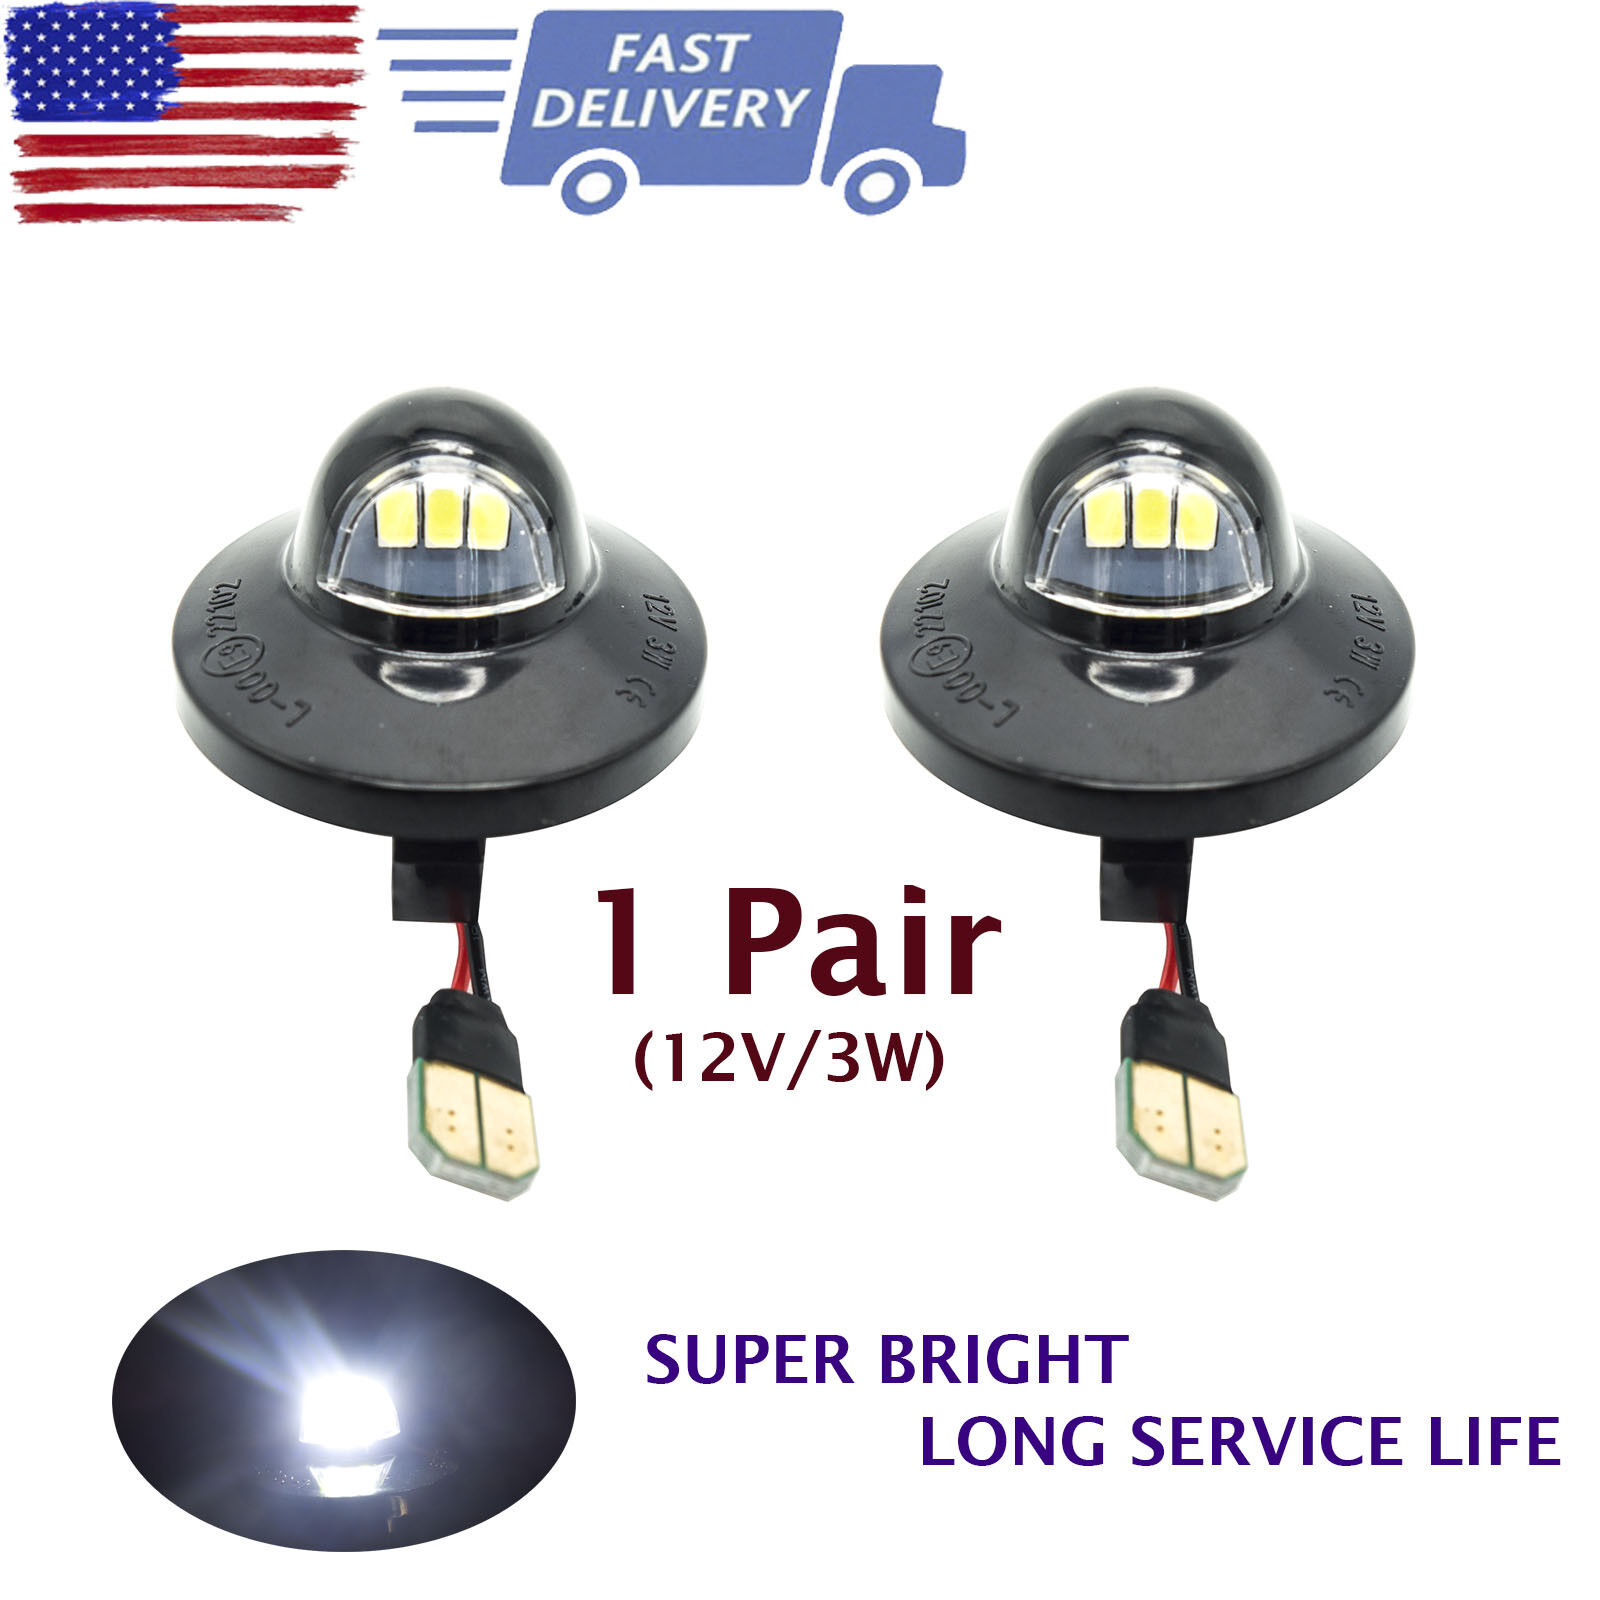 FOR 1990-2016 FORD F250 F350 HIGH POWER LED SMD LICENSE PLATE LIGHT BULB PAIR US